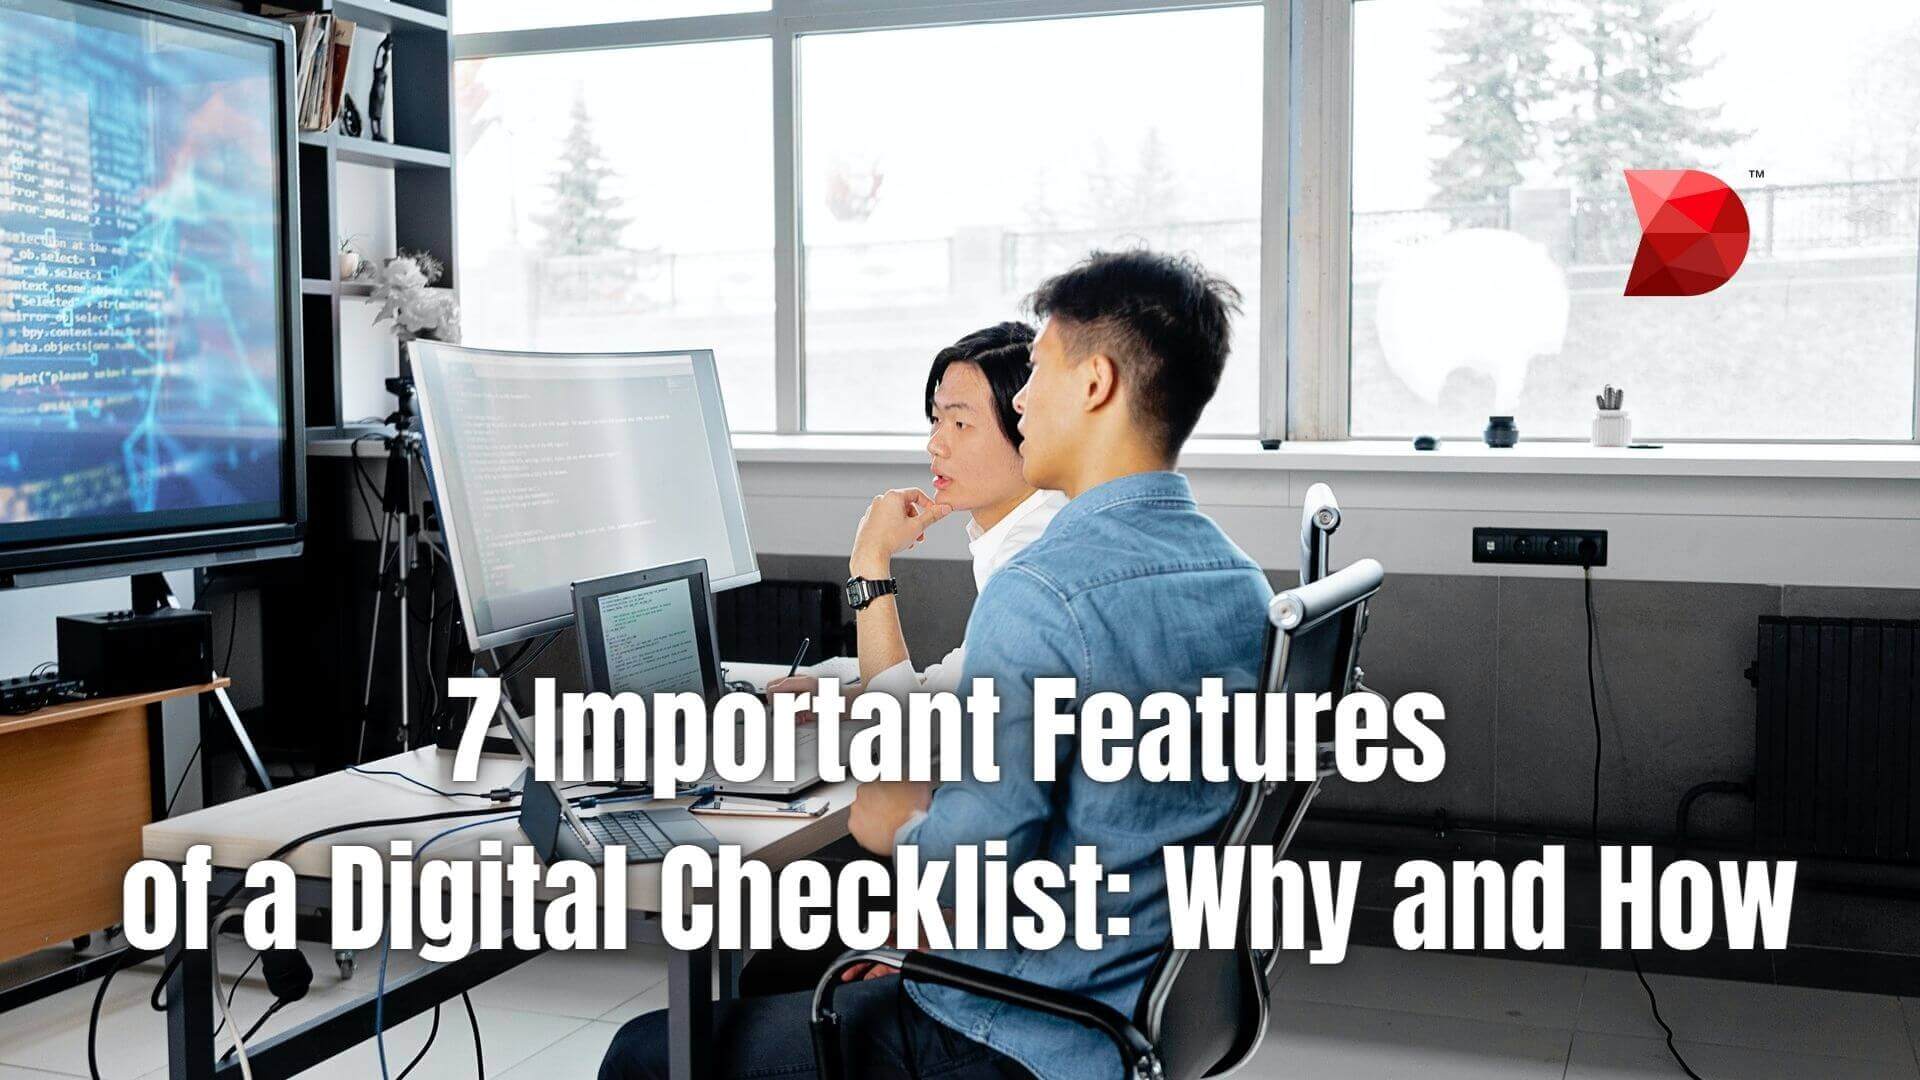 7 Important Features of a Digital Checklist